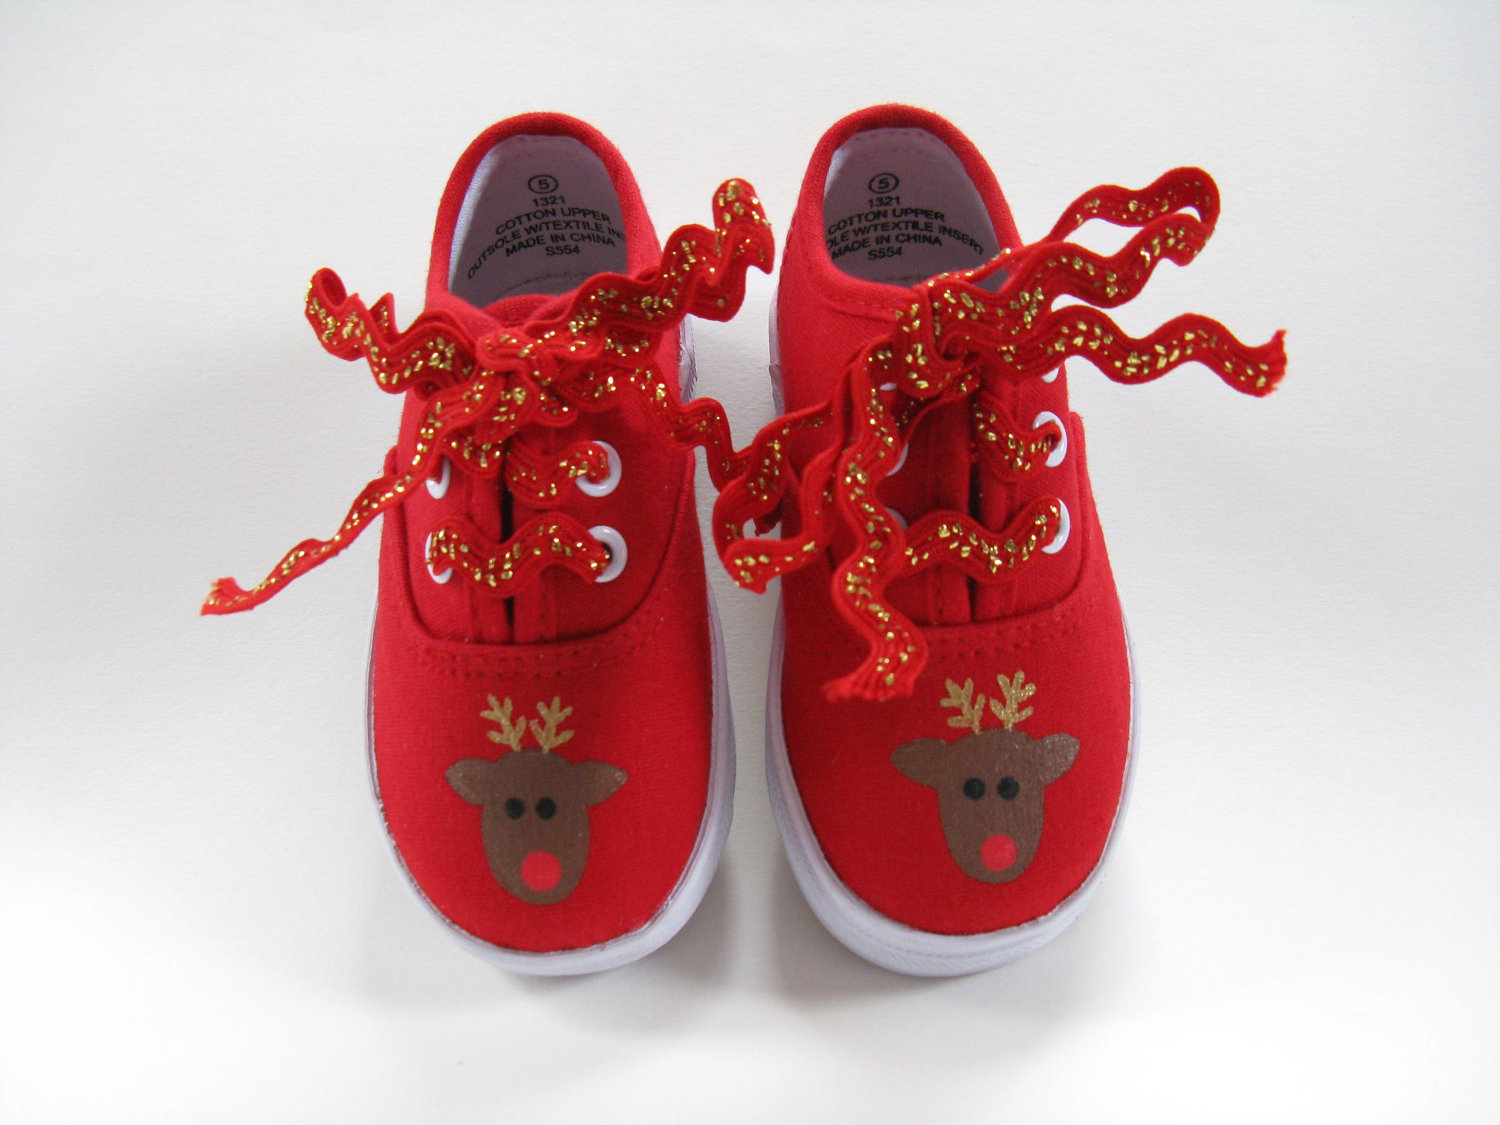 40 Super Cool Christmas Shoes and Ways to Decorate With It All About